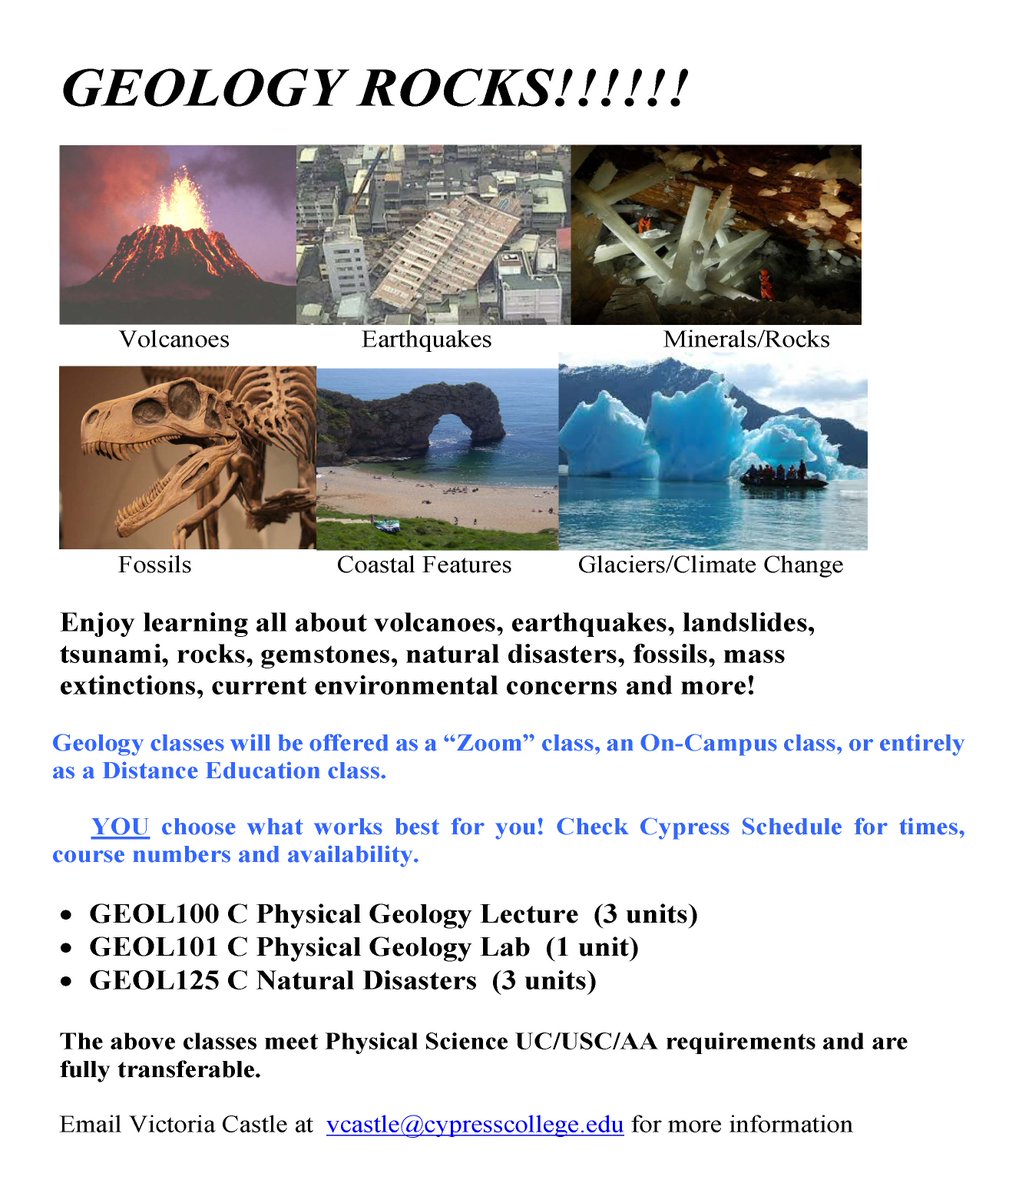 Geology rocks! Learn about volcanoes, tsunami, rocks, and more! Geology classes will be offered via Zoom, on campus, or entirely online. You choose what works best for you (check the class schedule for details)! Email Victoria Castle at vcastle@cypresscollege.edu for information. https://t.co/CgYvIzwS3F